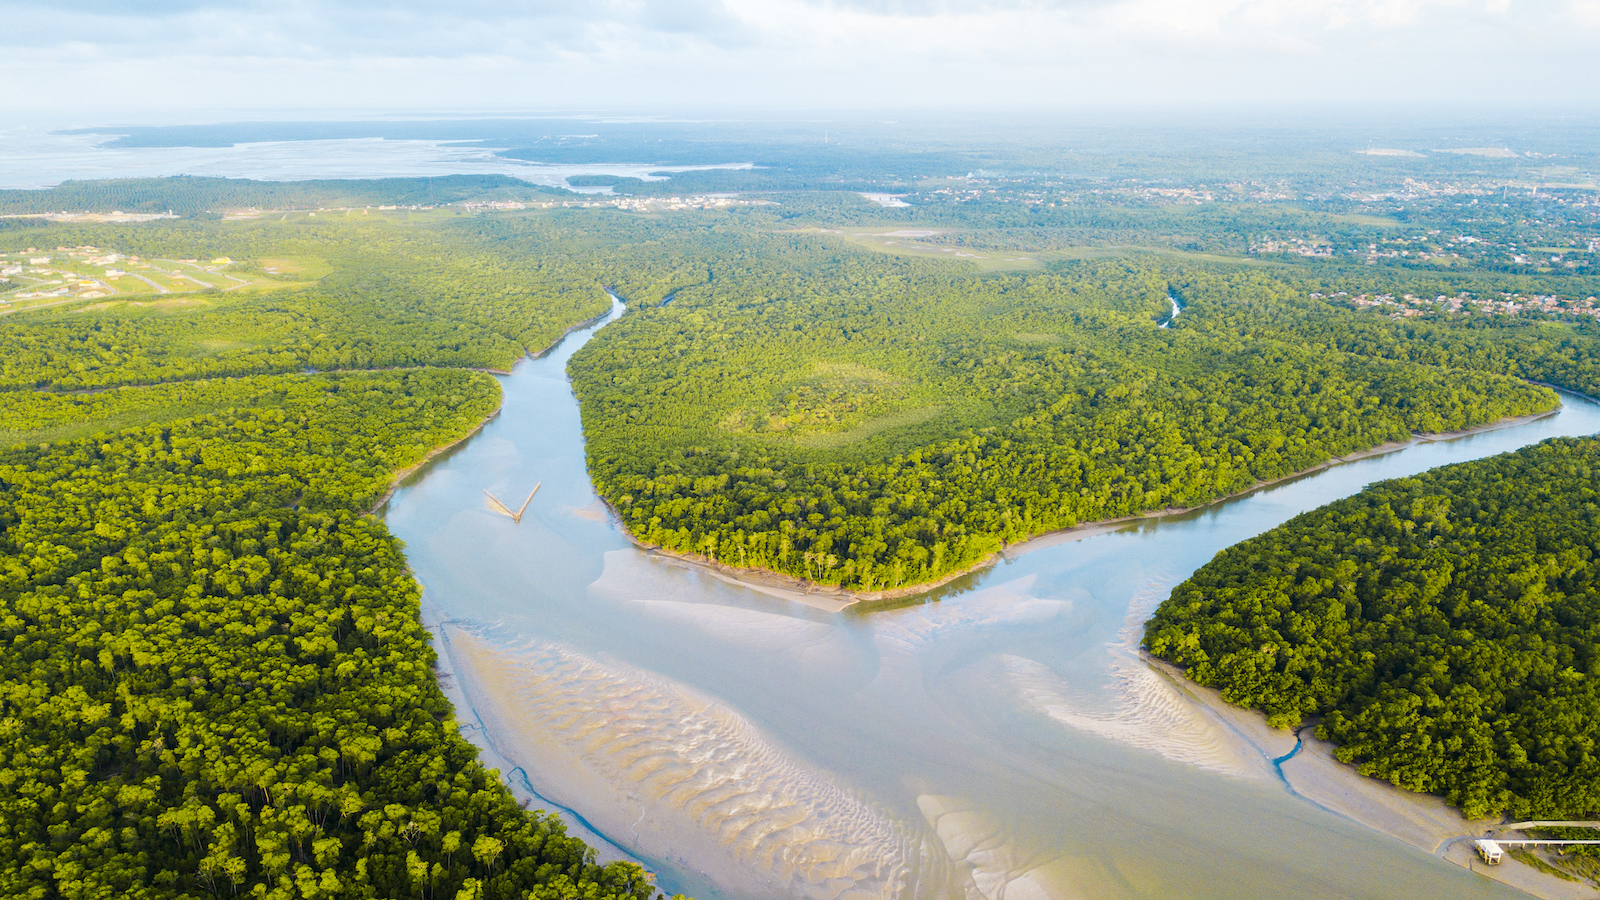 Aerial view of a river with forests